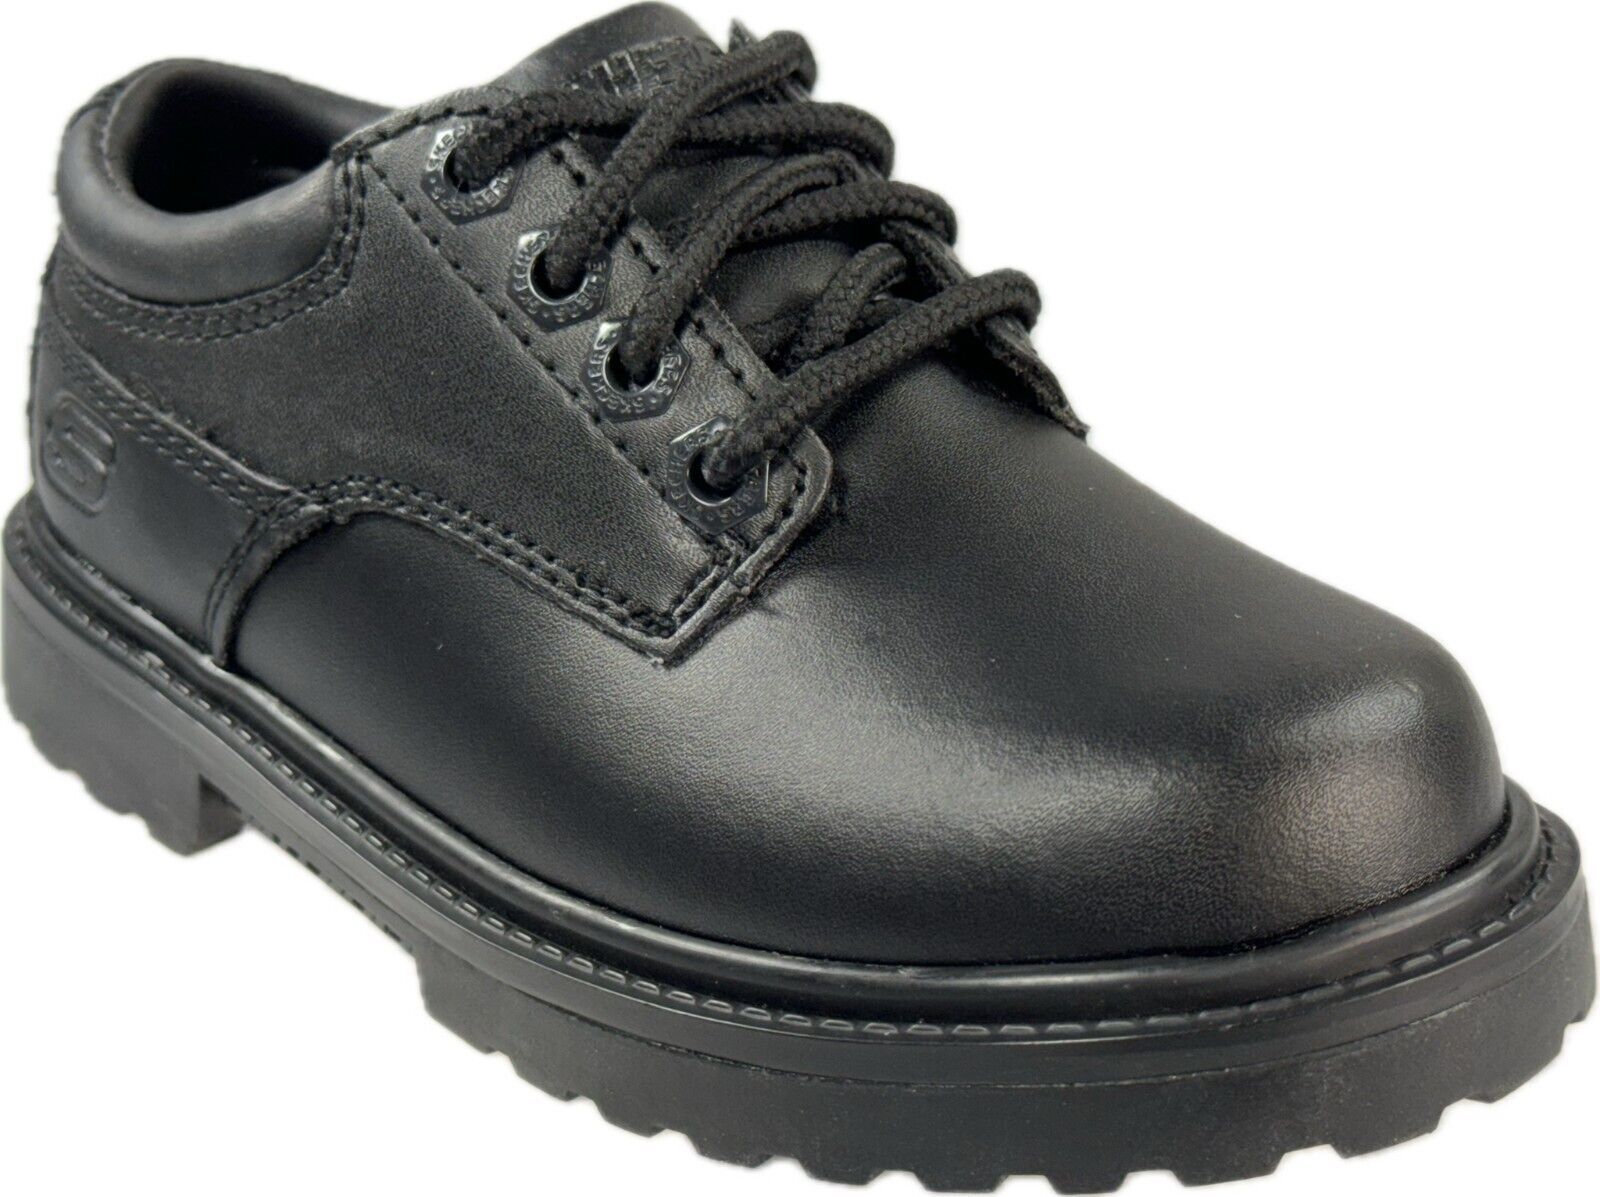 Primary image for SKECHERS KELLET BLACK LEATHER OXFORD SHOES SMALL KIDS SZ 11.5.